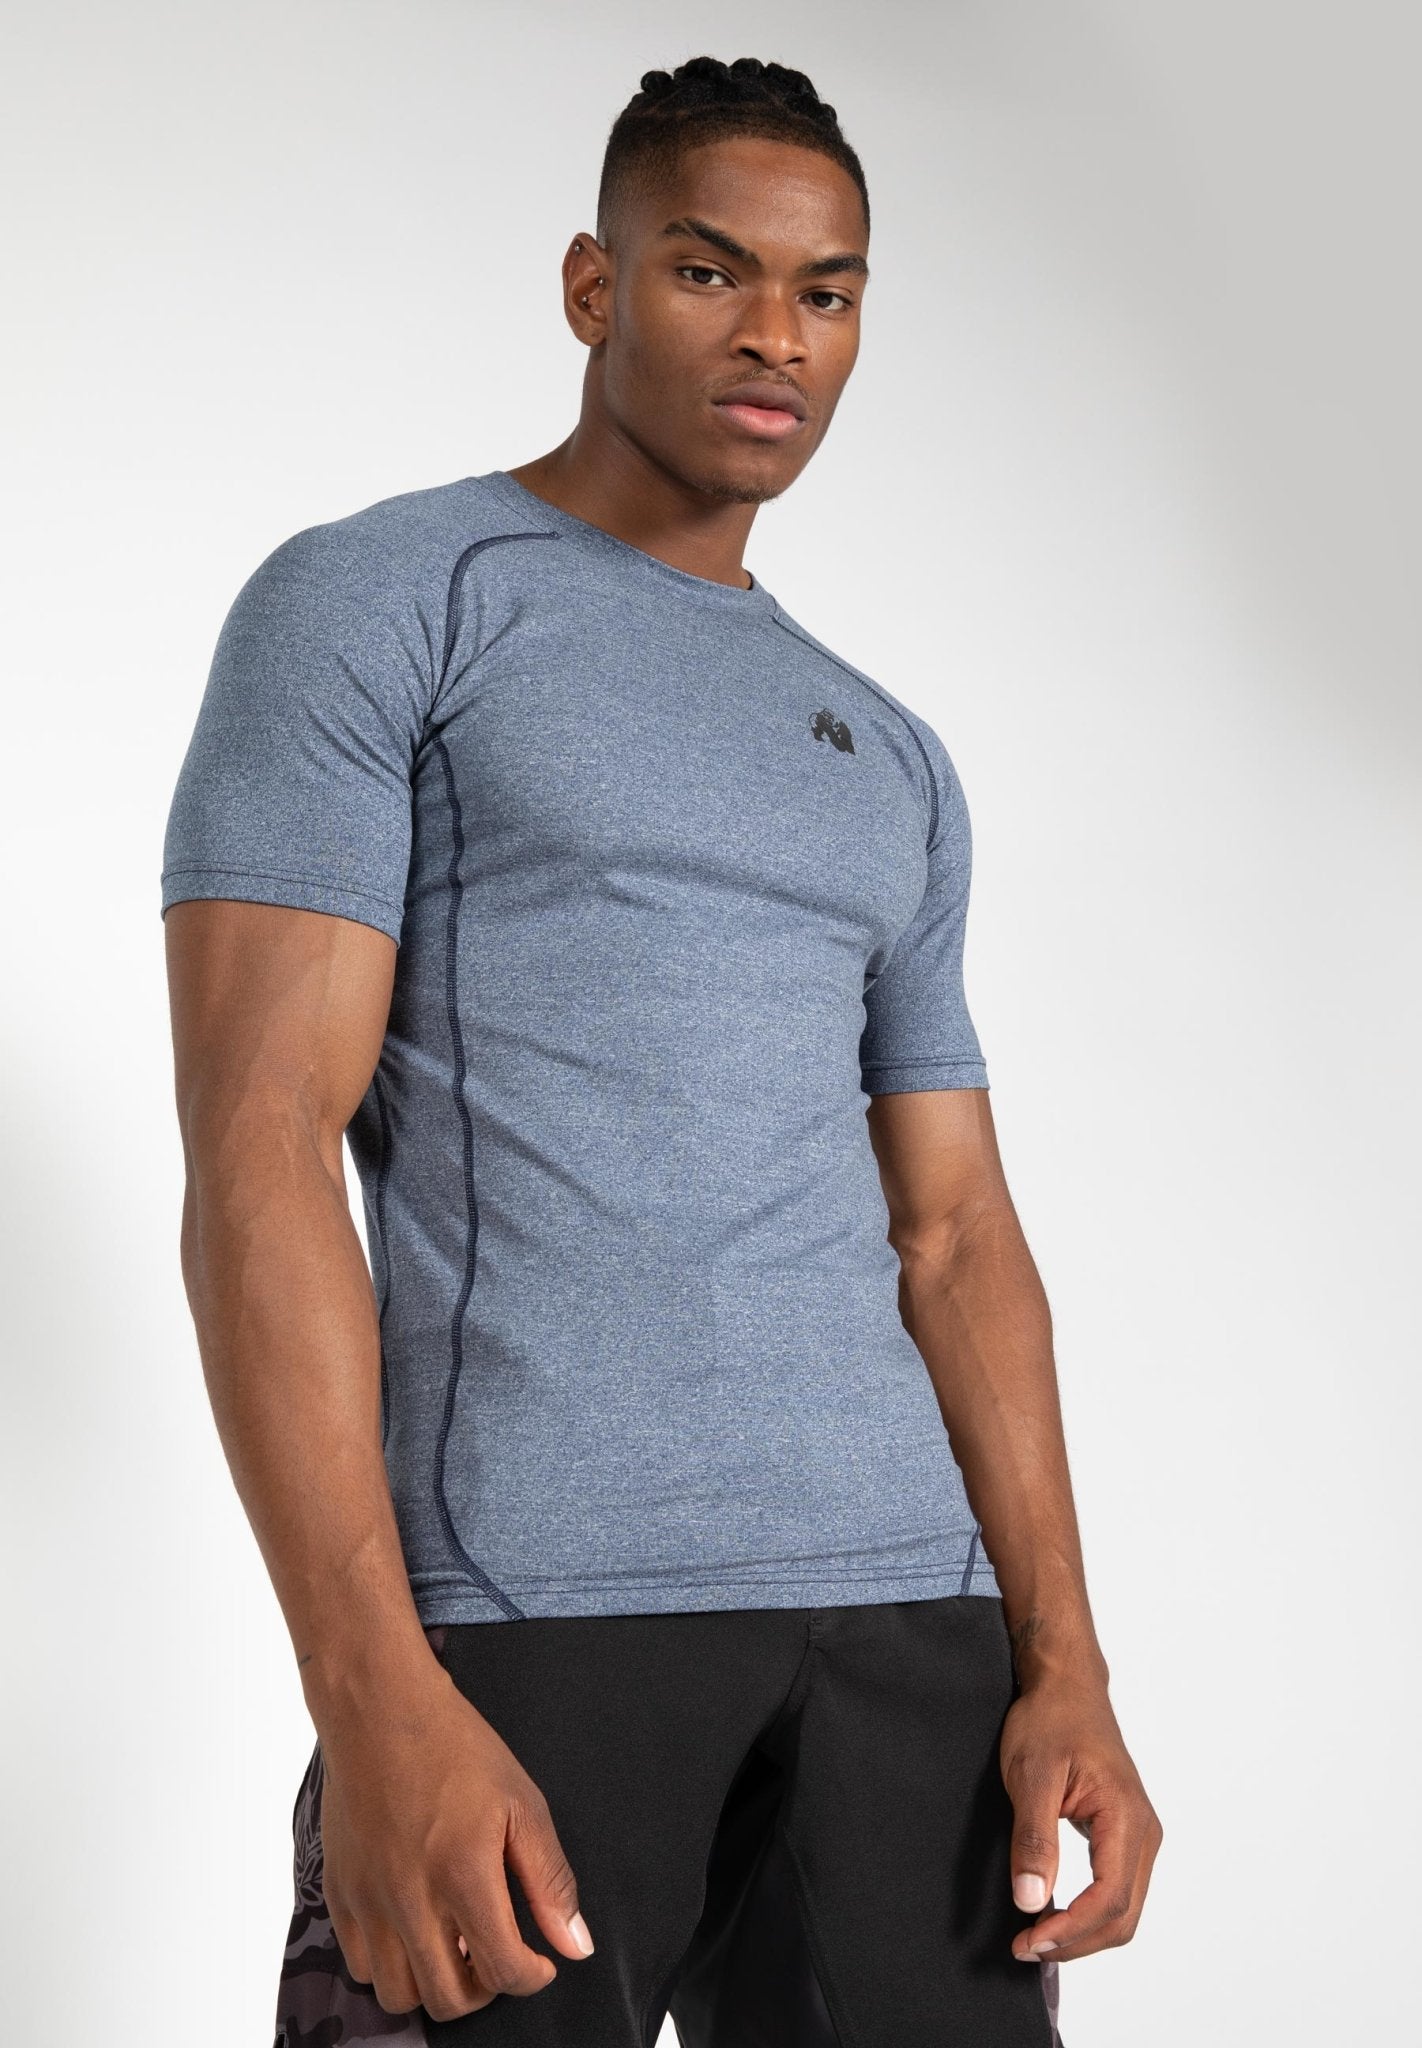 Under Armour Sale  Shop sportswear performance clothing  running clothing   ASOS